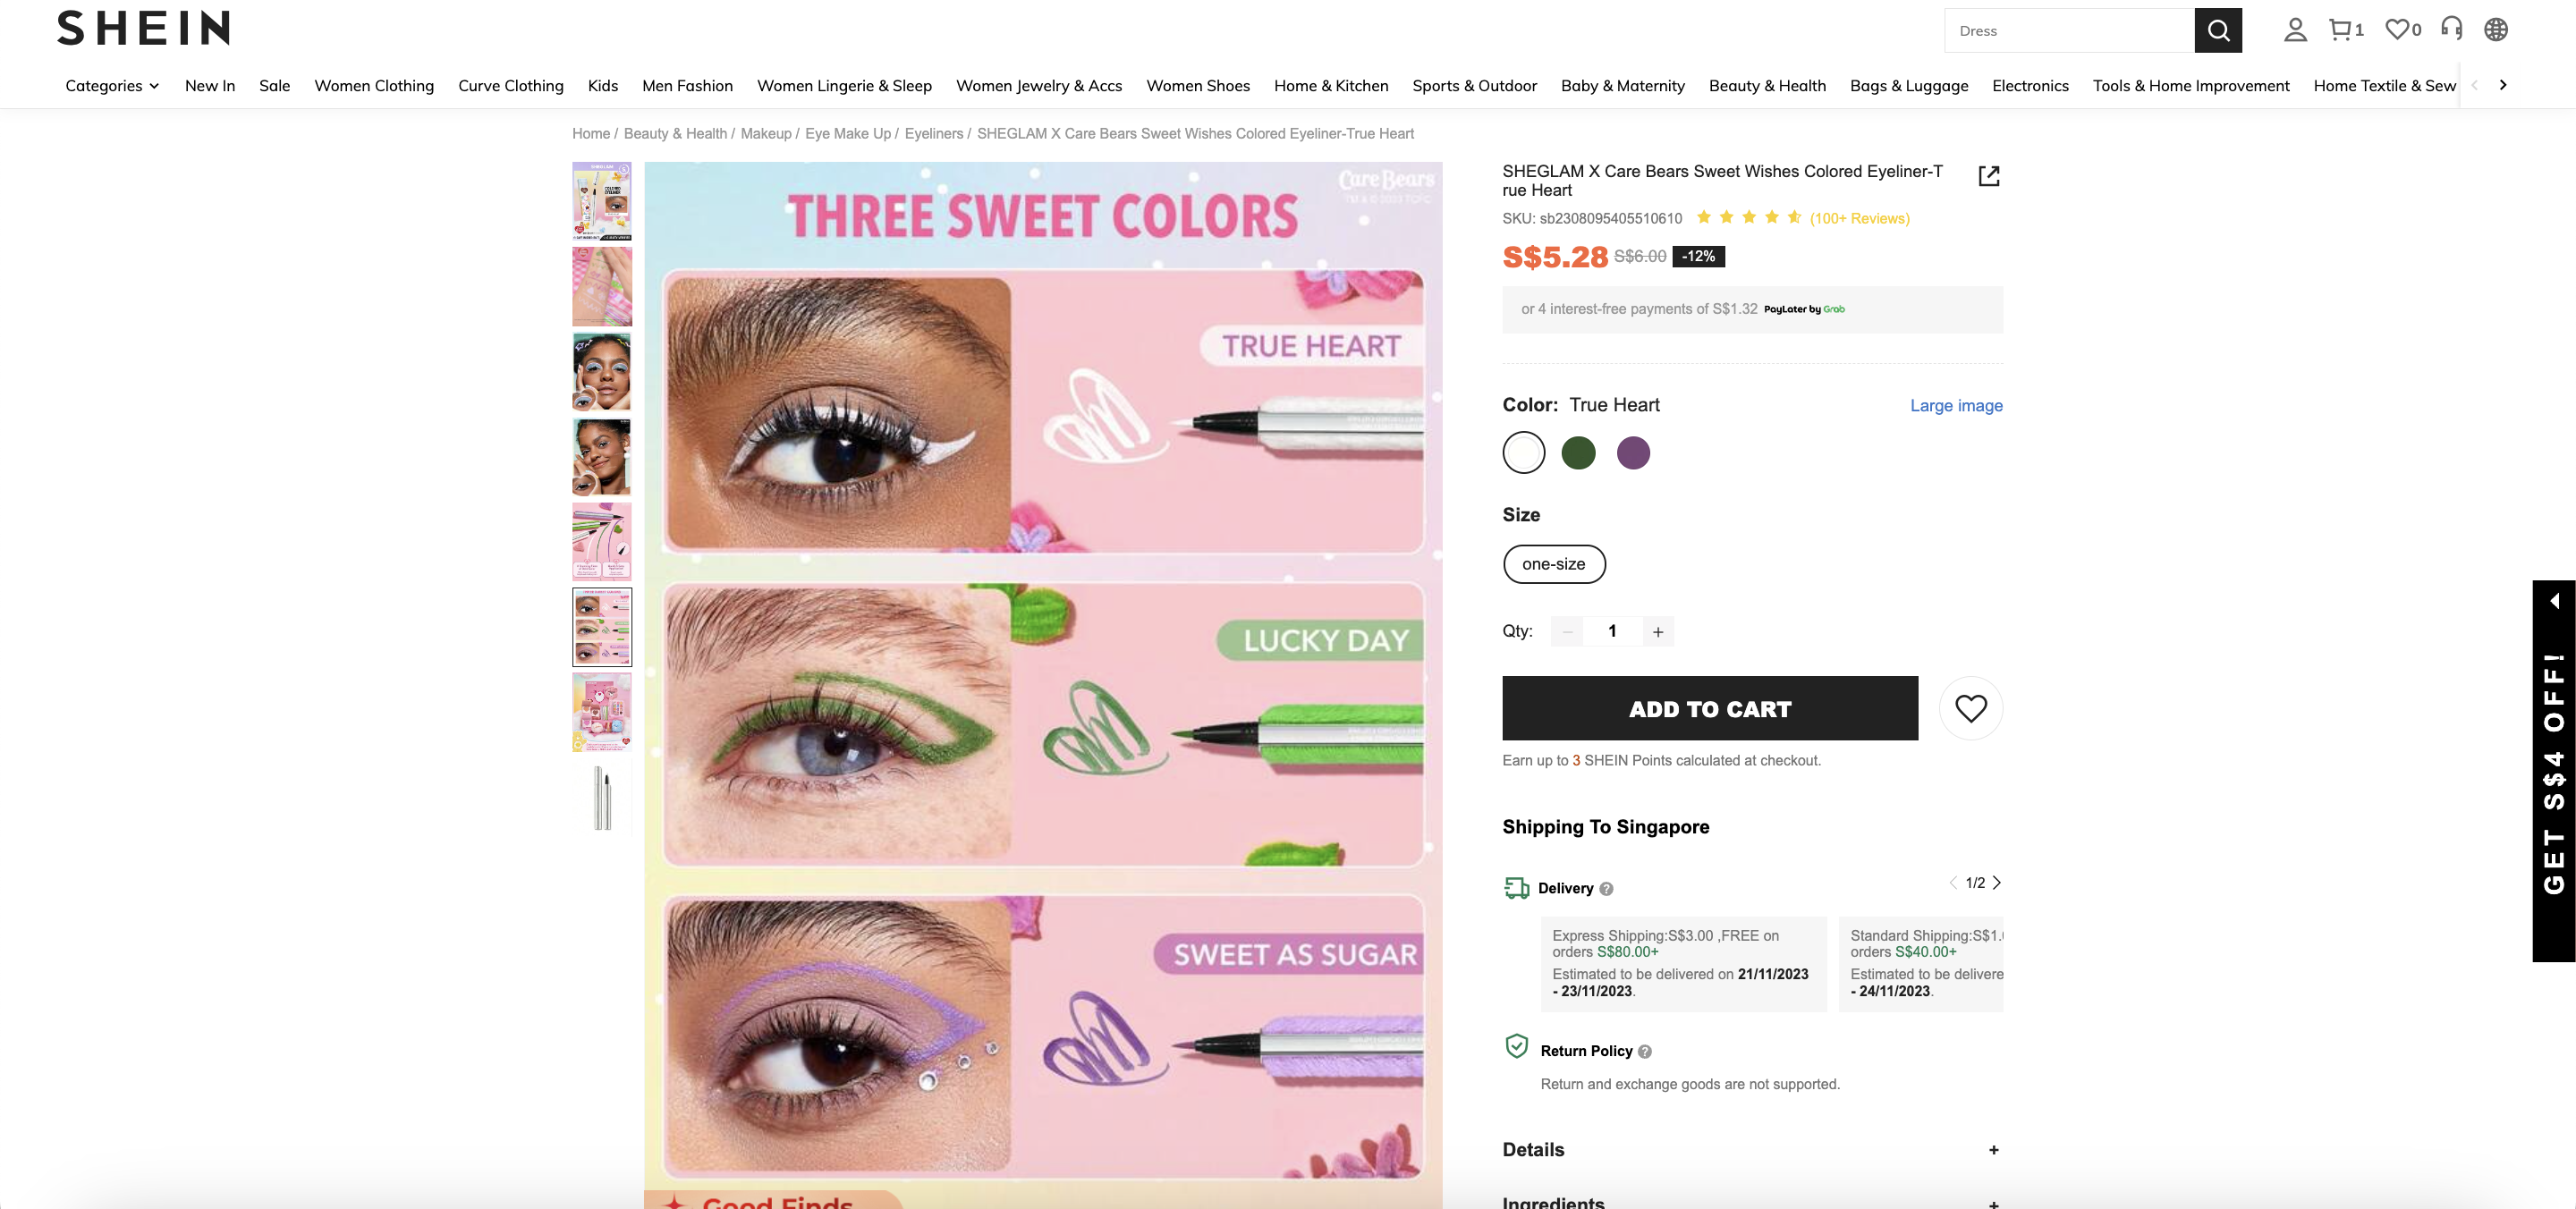 SHEGLAM X Care Bears Sweet Wishes Colored Eyeliners